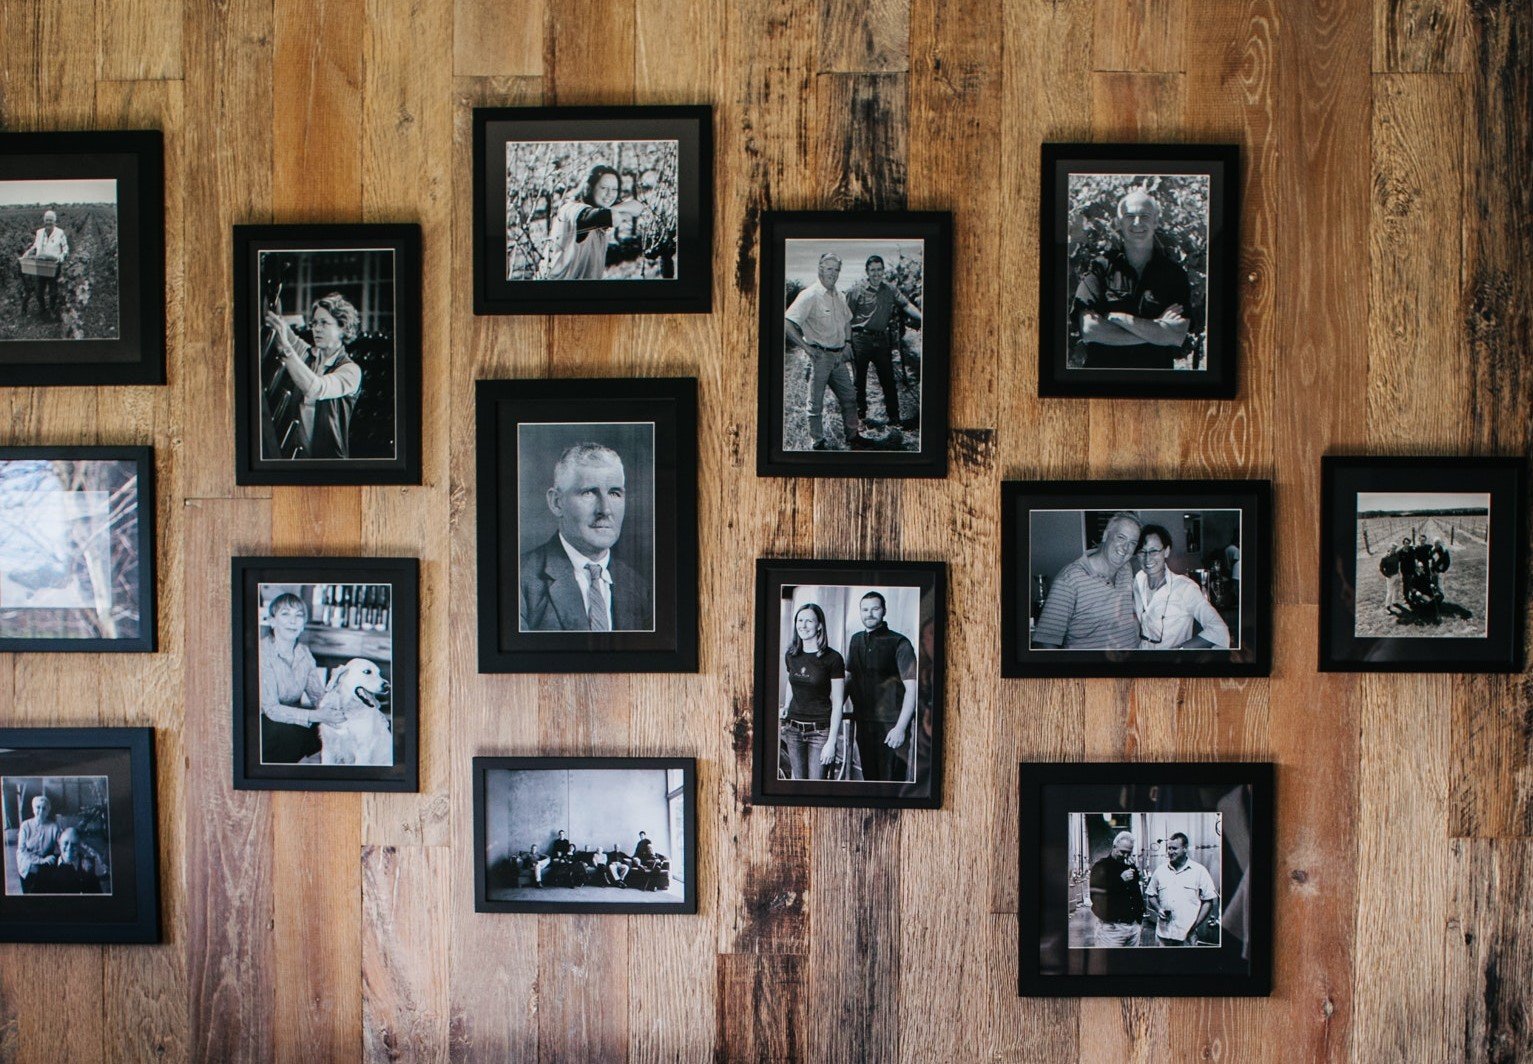 Monica was surprised at the collection of old photos in old Charles's bedroom. | Source: Pexels